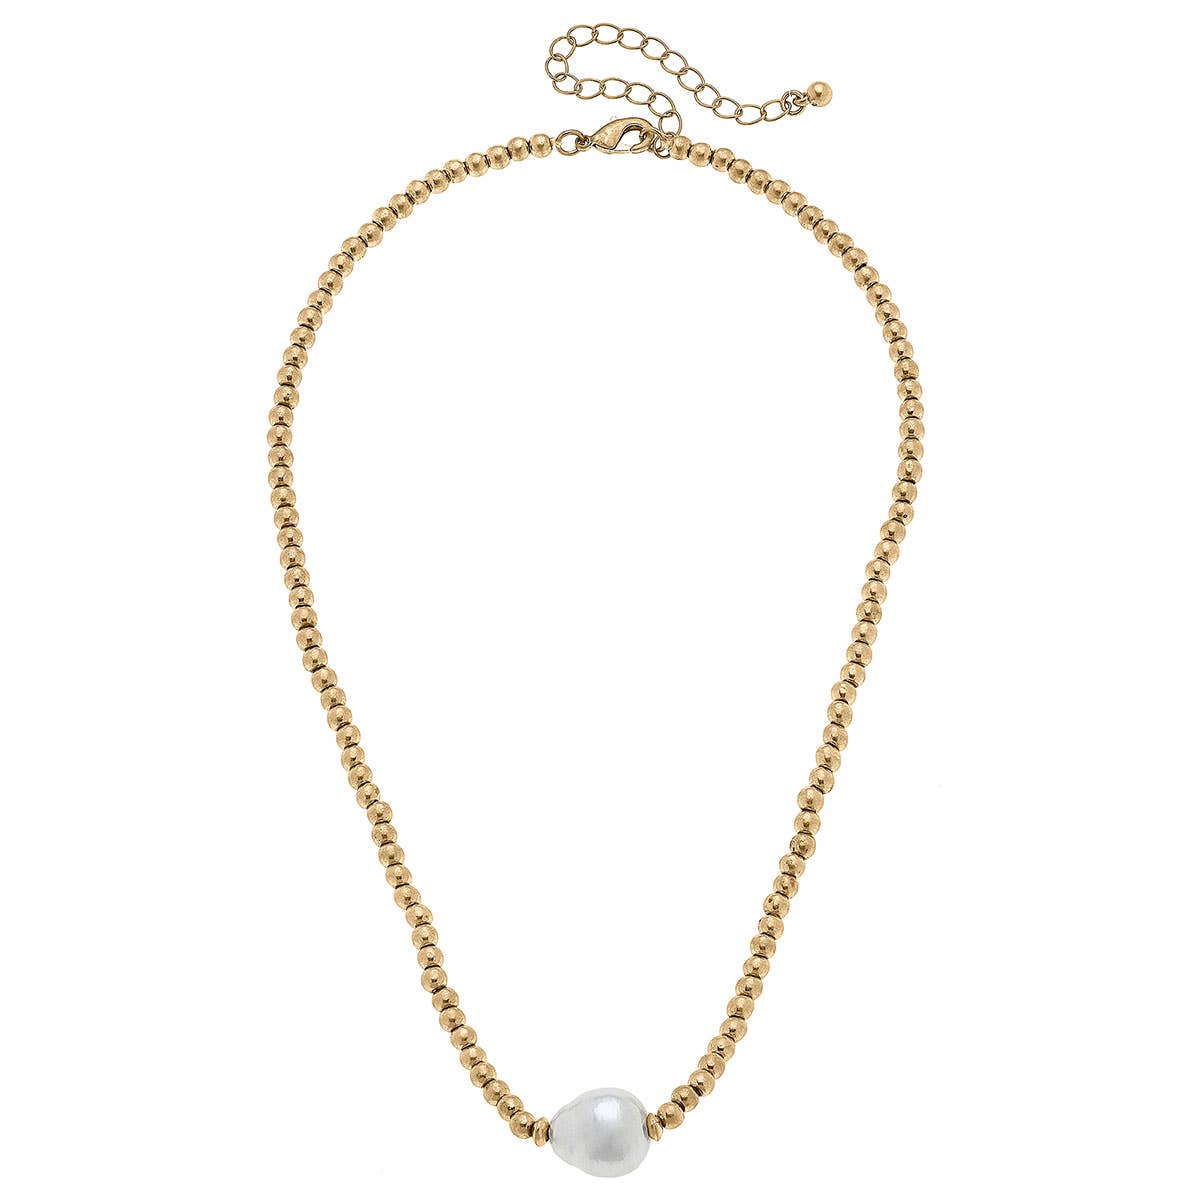 Greta Freshwater Pearl Necklace in Worn Gold & Ivory